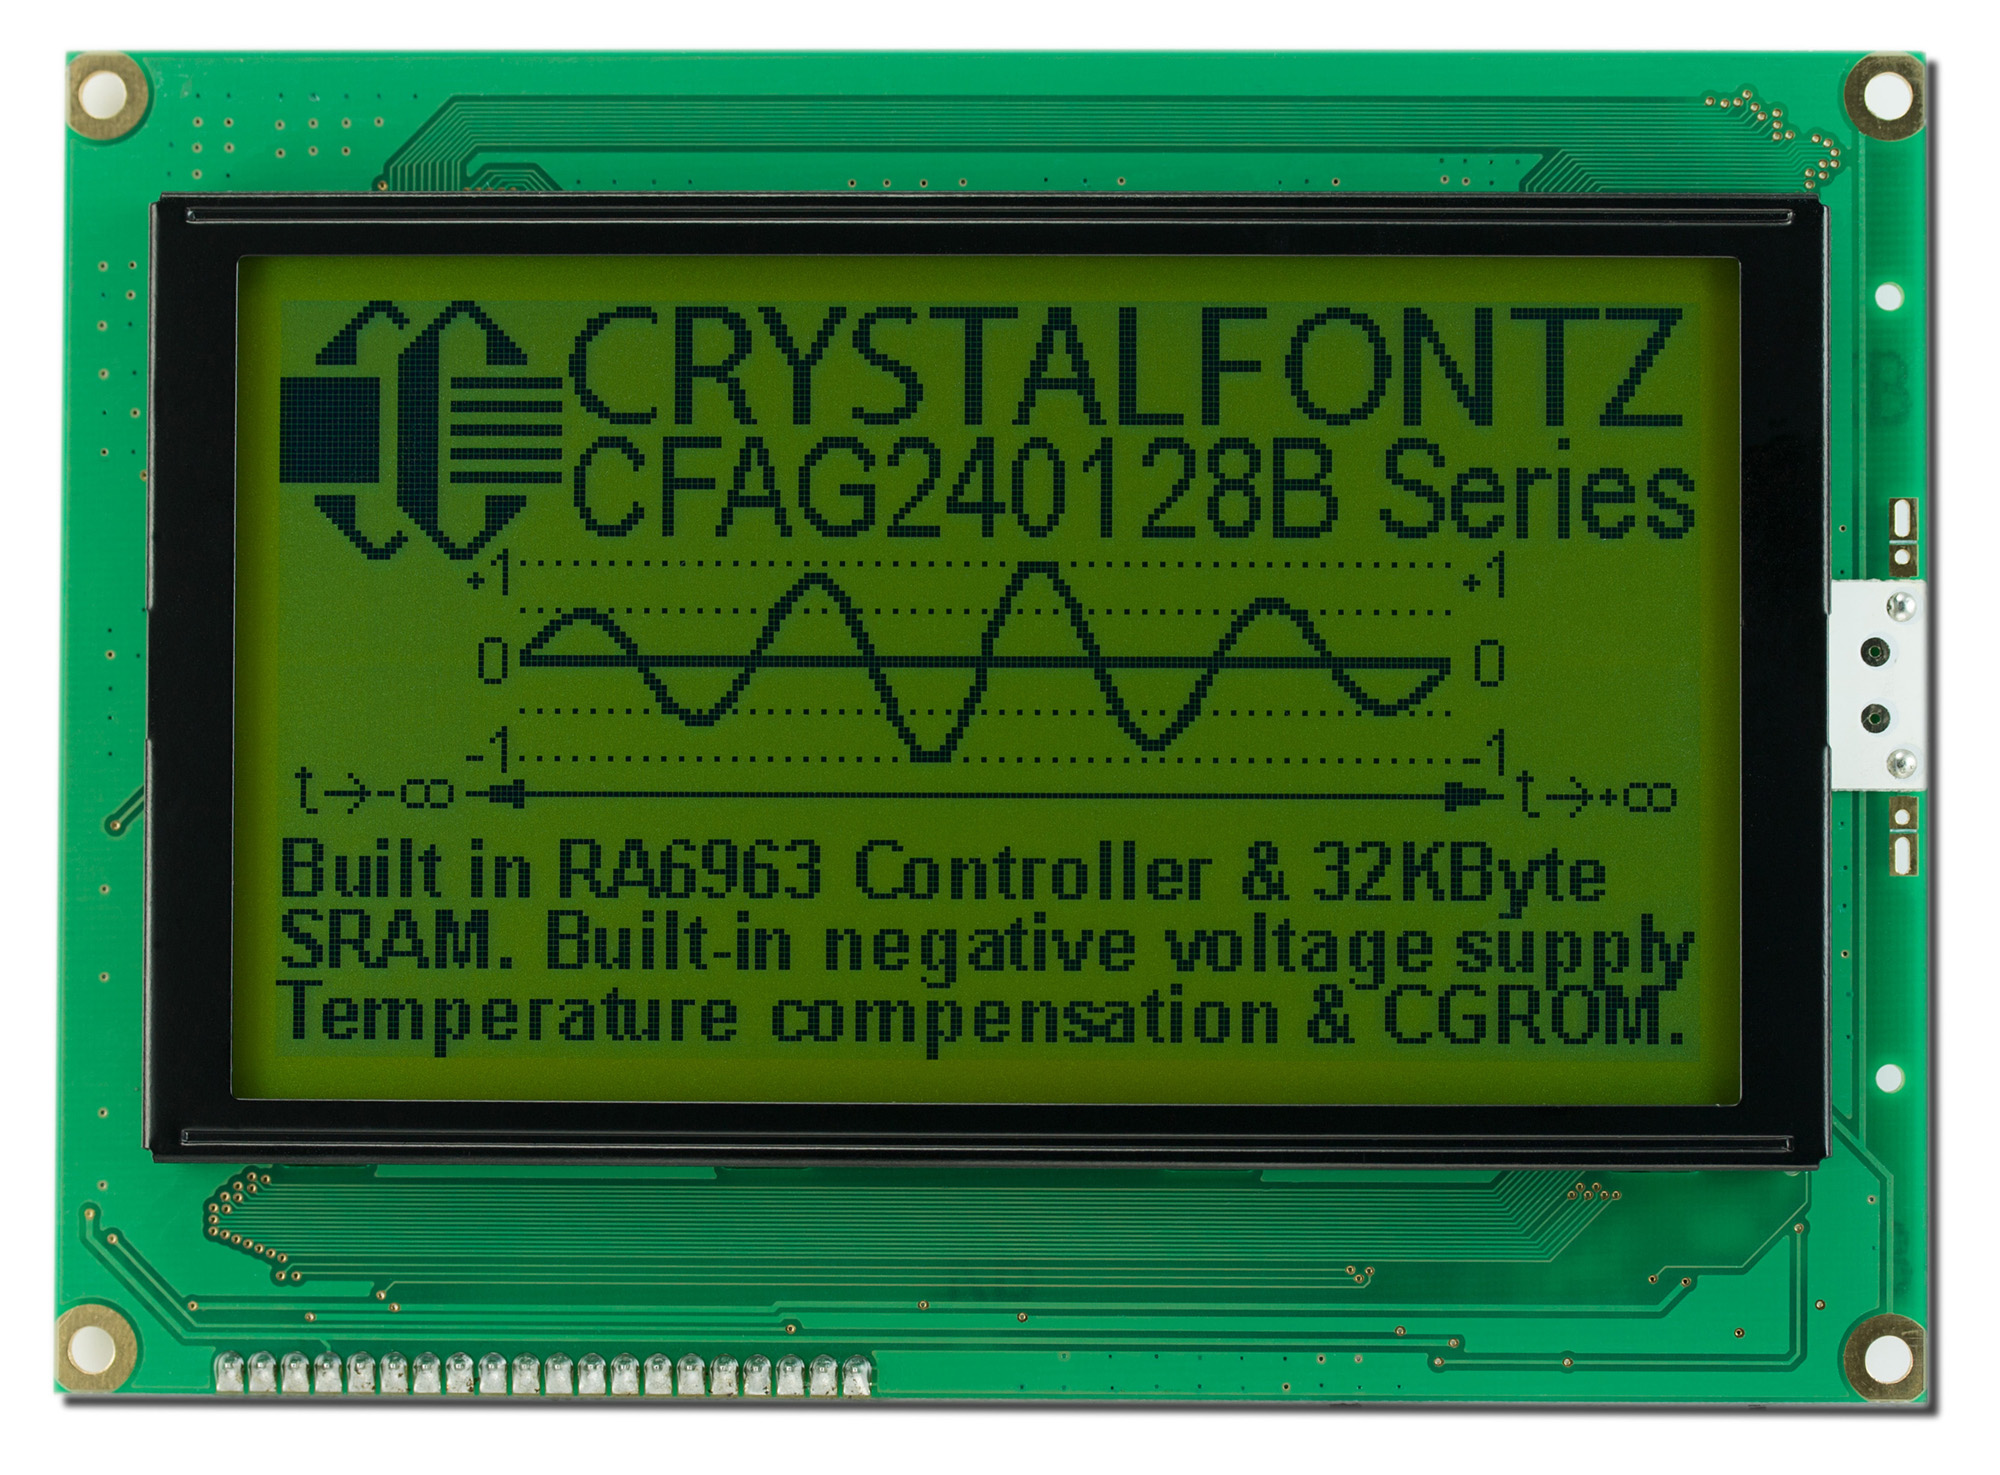 240x128 Sunlight Readable Graphic LCD from Crystalfontz